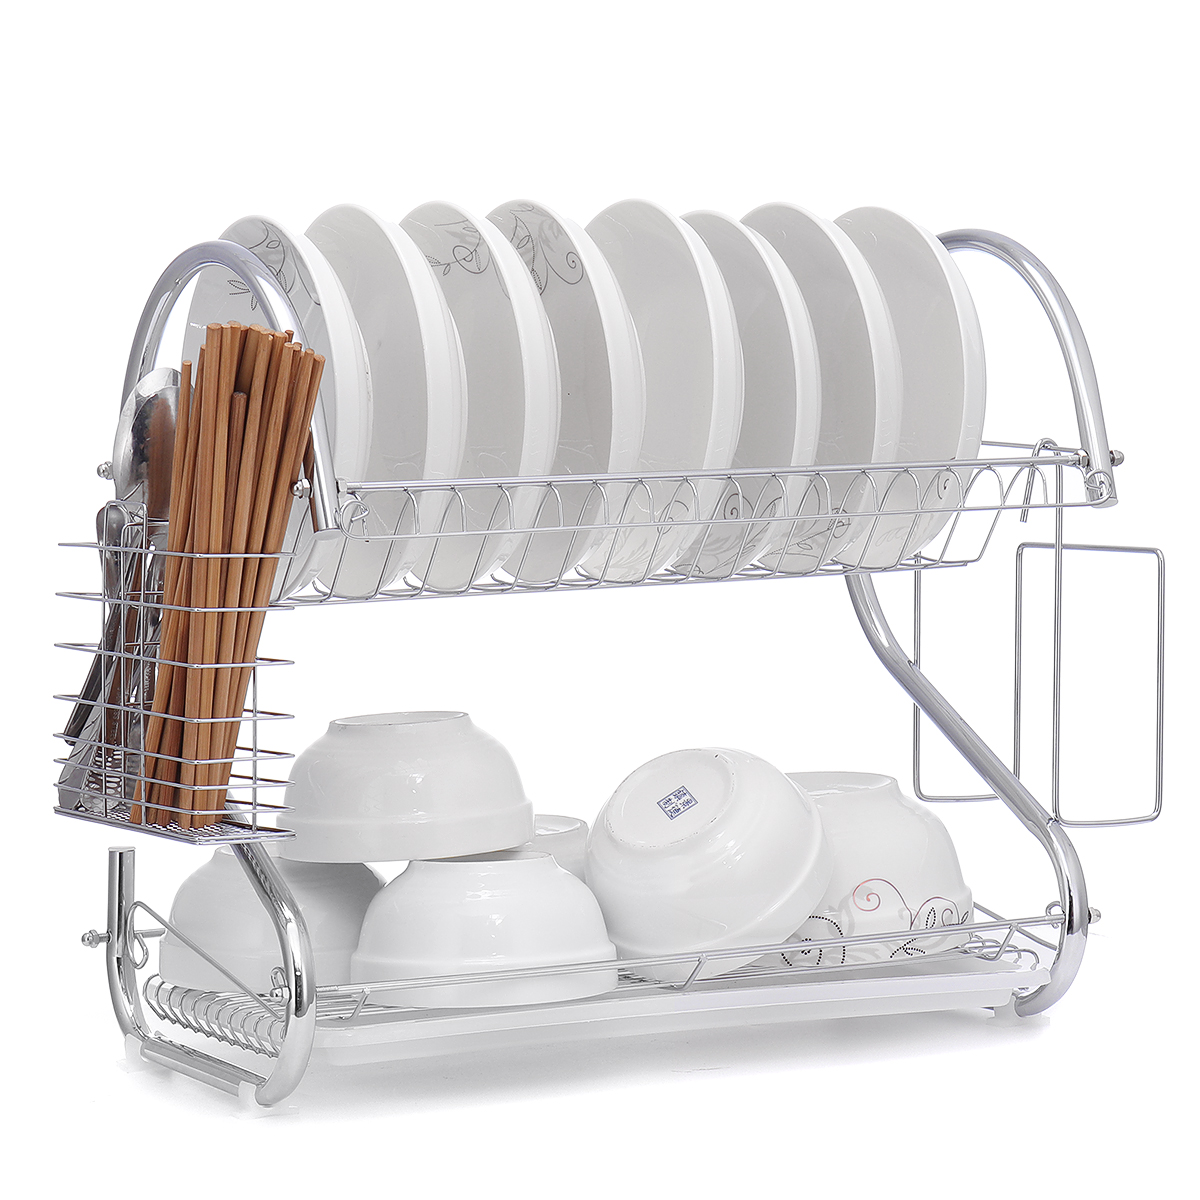 Dish-Drying-Rack-2-Tier-Dish-Rack-with-Utensil-Holder-Cup-Holder-and-Dish-Drainer-for-Kitchen-Counte-1665917-5